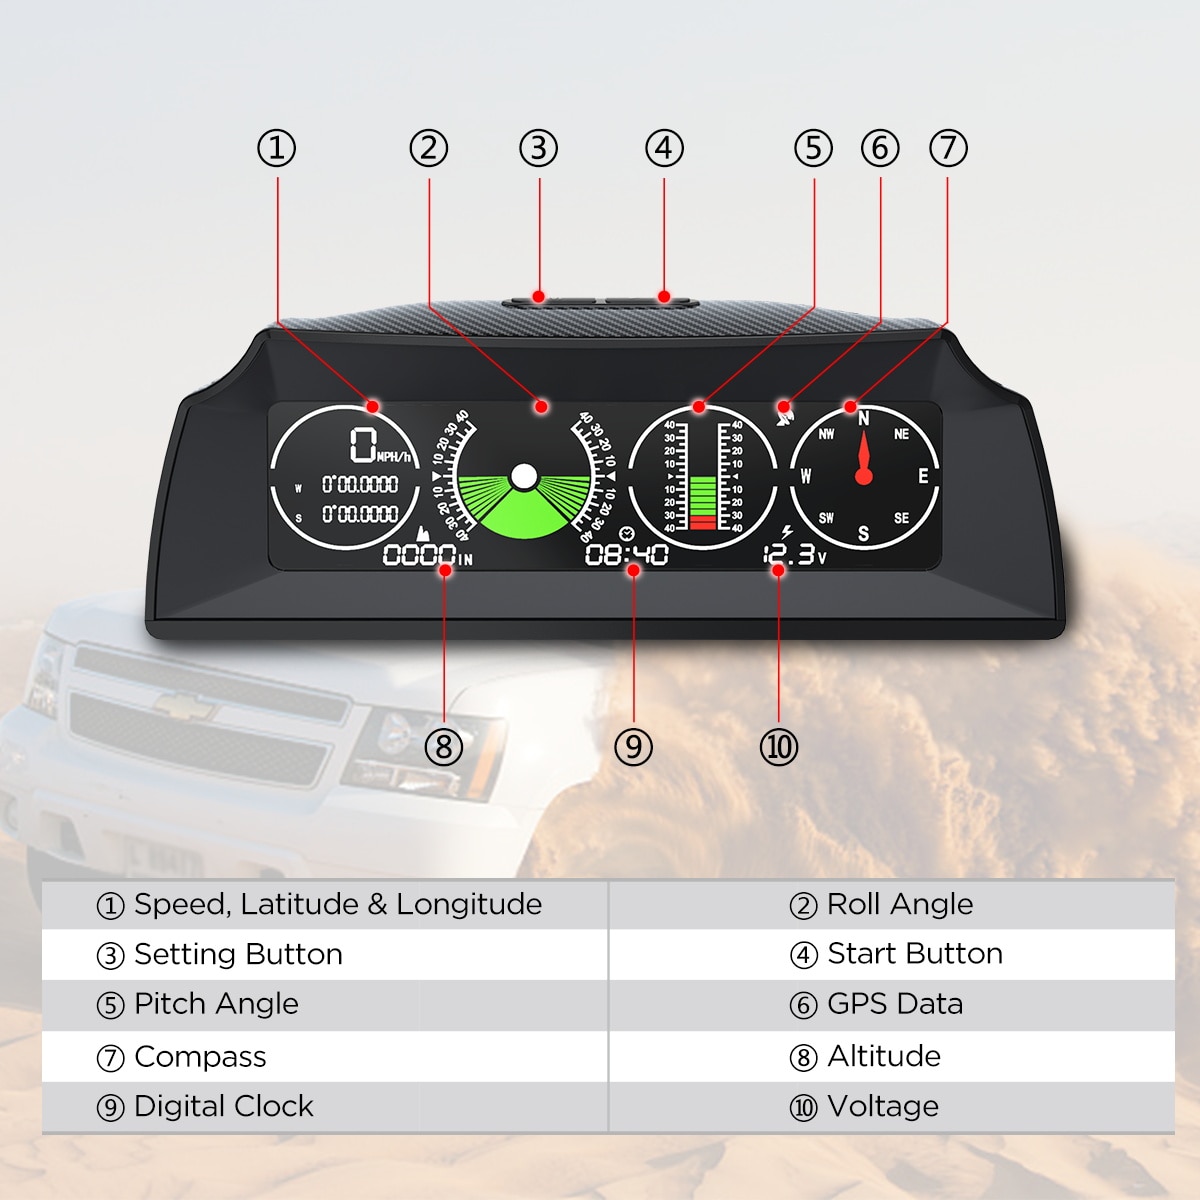 AUTOOL X90 GPS HUD Car Speed Slope Meter Inclinometer Auto 12v General Head-Up Display with Tilt Pitch Angle Protractor Latitude